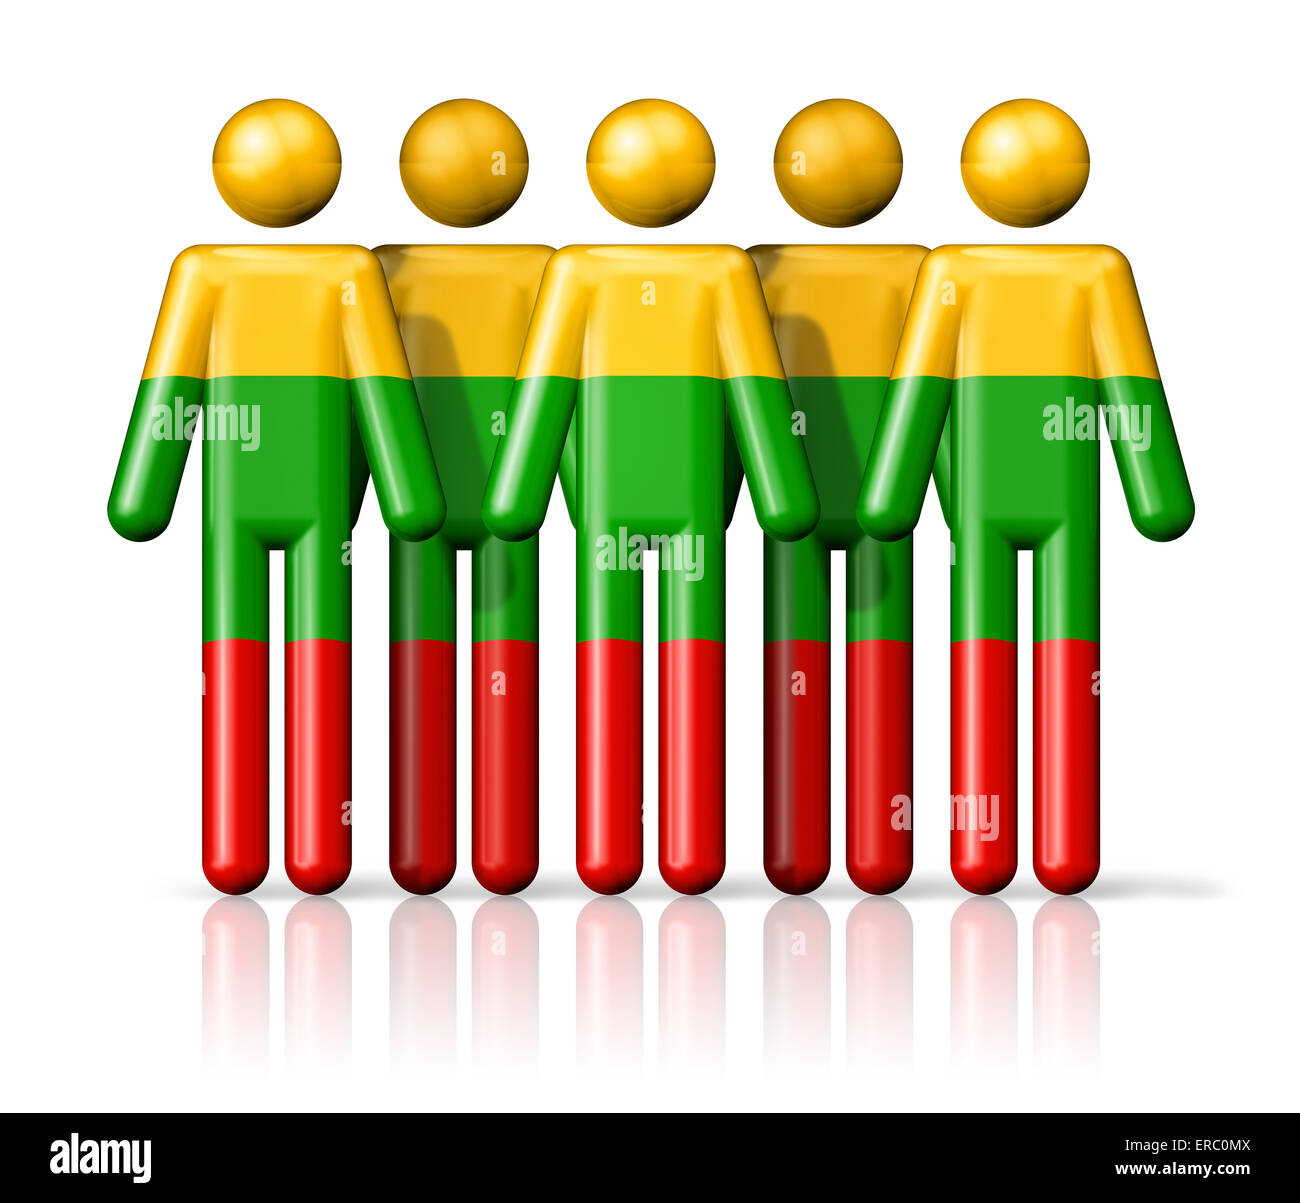 Flag of Lithuania on stick figure - national and social community symbol 3D icon Stock Photo